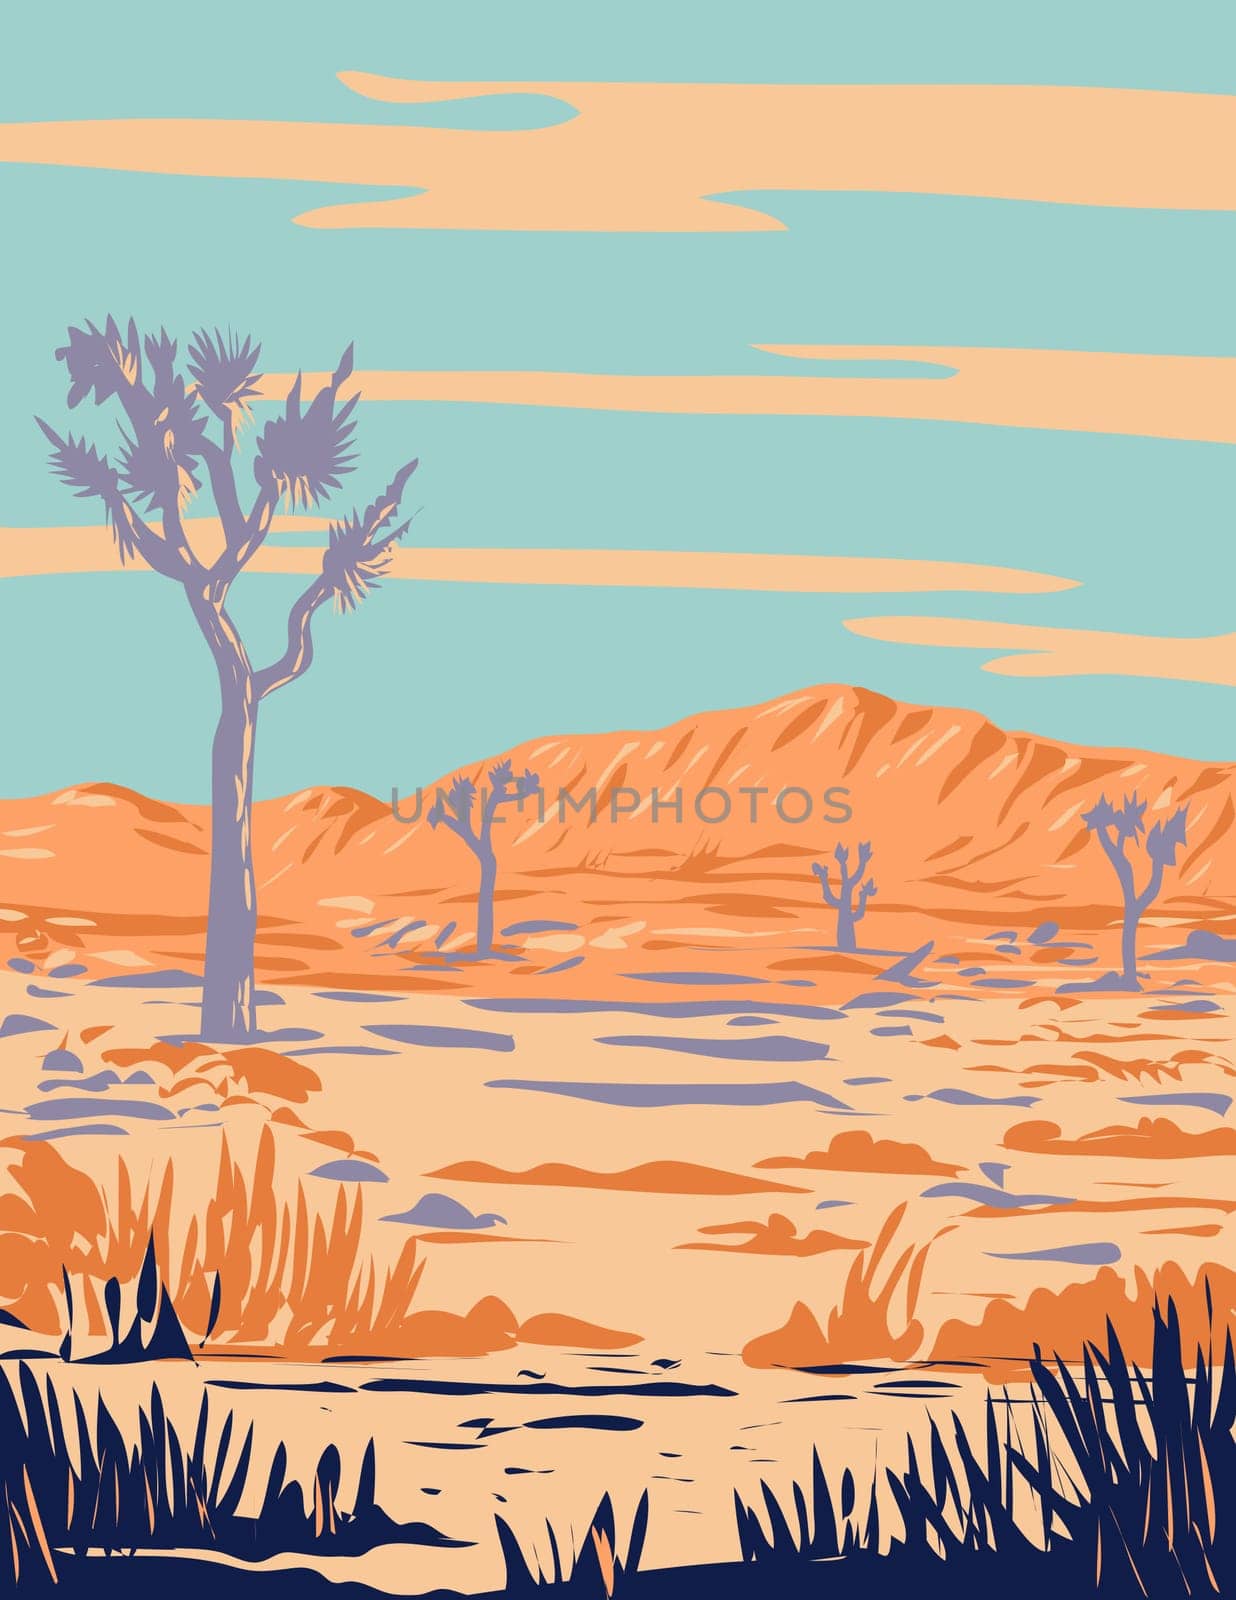 WPA poster art of Joshua Tree National Park located in Mojave Desert, California during summer done in works project administration or federal art project style.